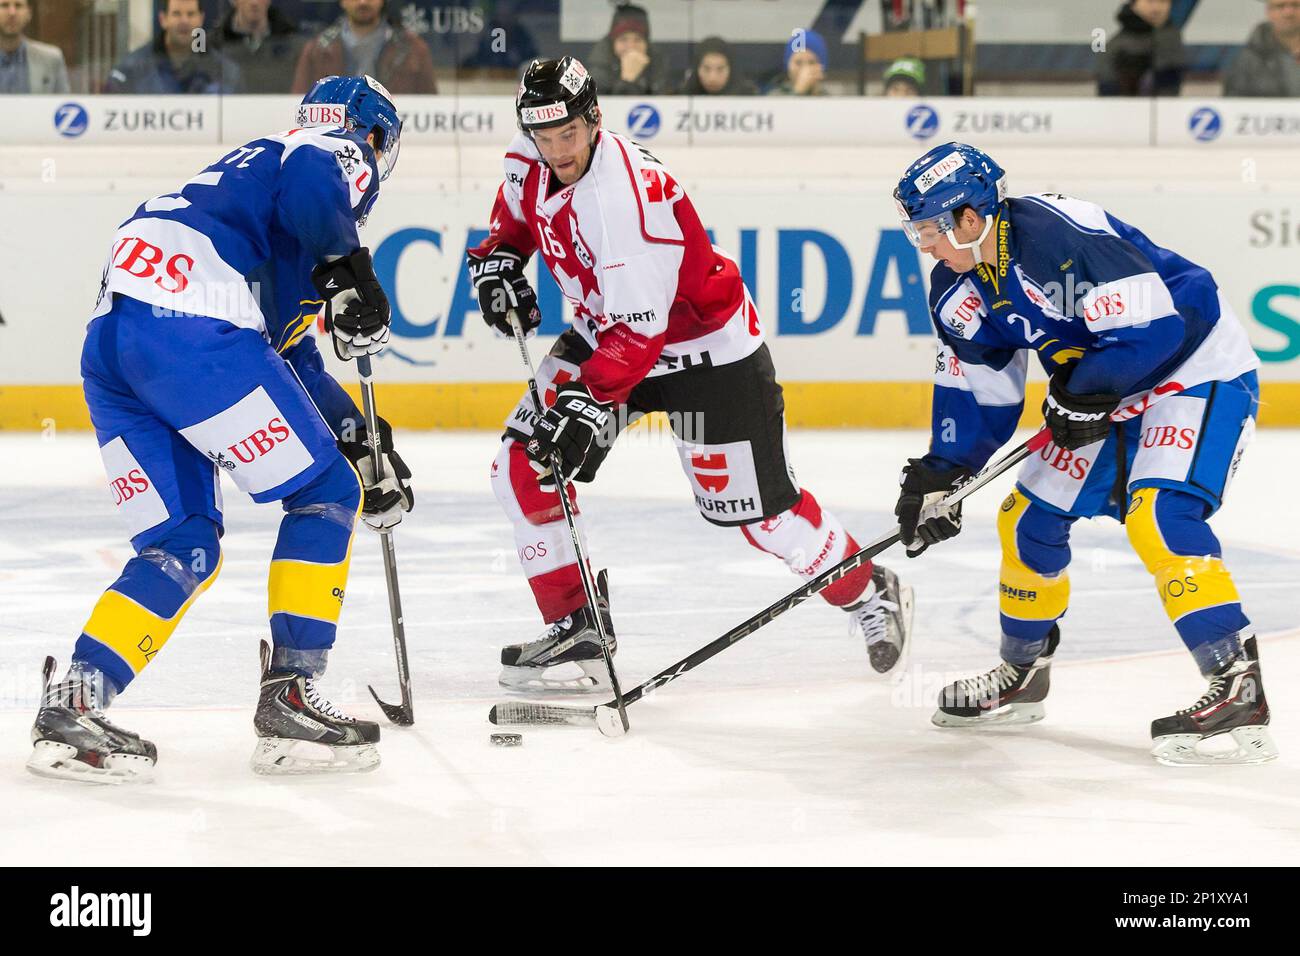 Davos' Silvio Schmutz, left, and Jens Nater, right, challenge for the puck  with Team Canada's Daniel Paille during the match between Switzerland's HC  Davos and Team Canada at the 89th Spengler Cup